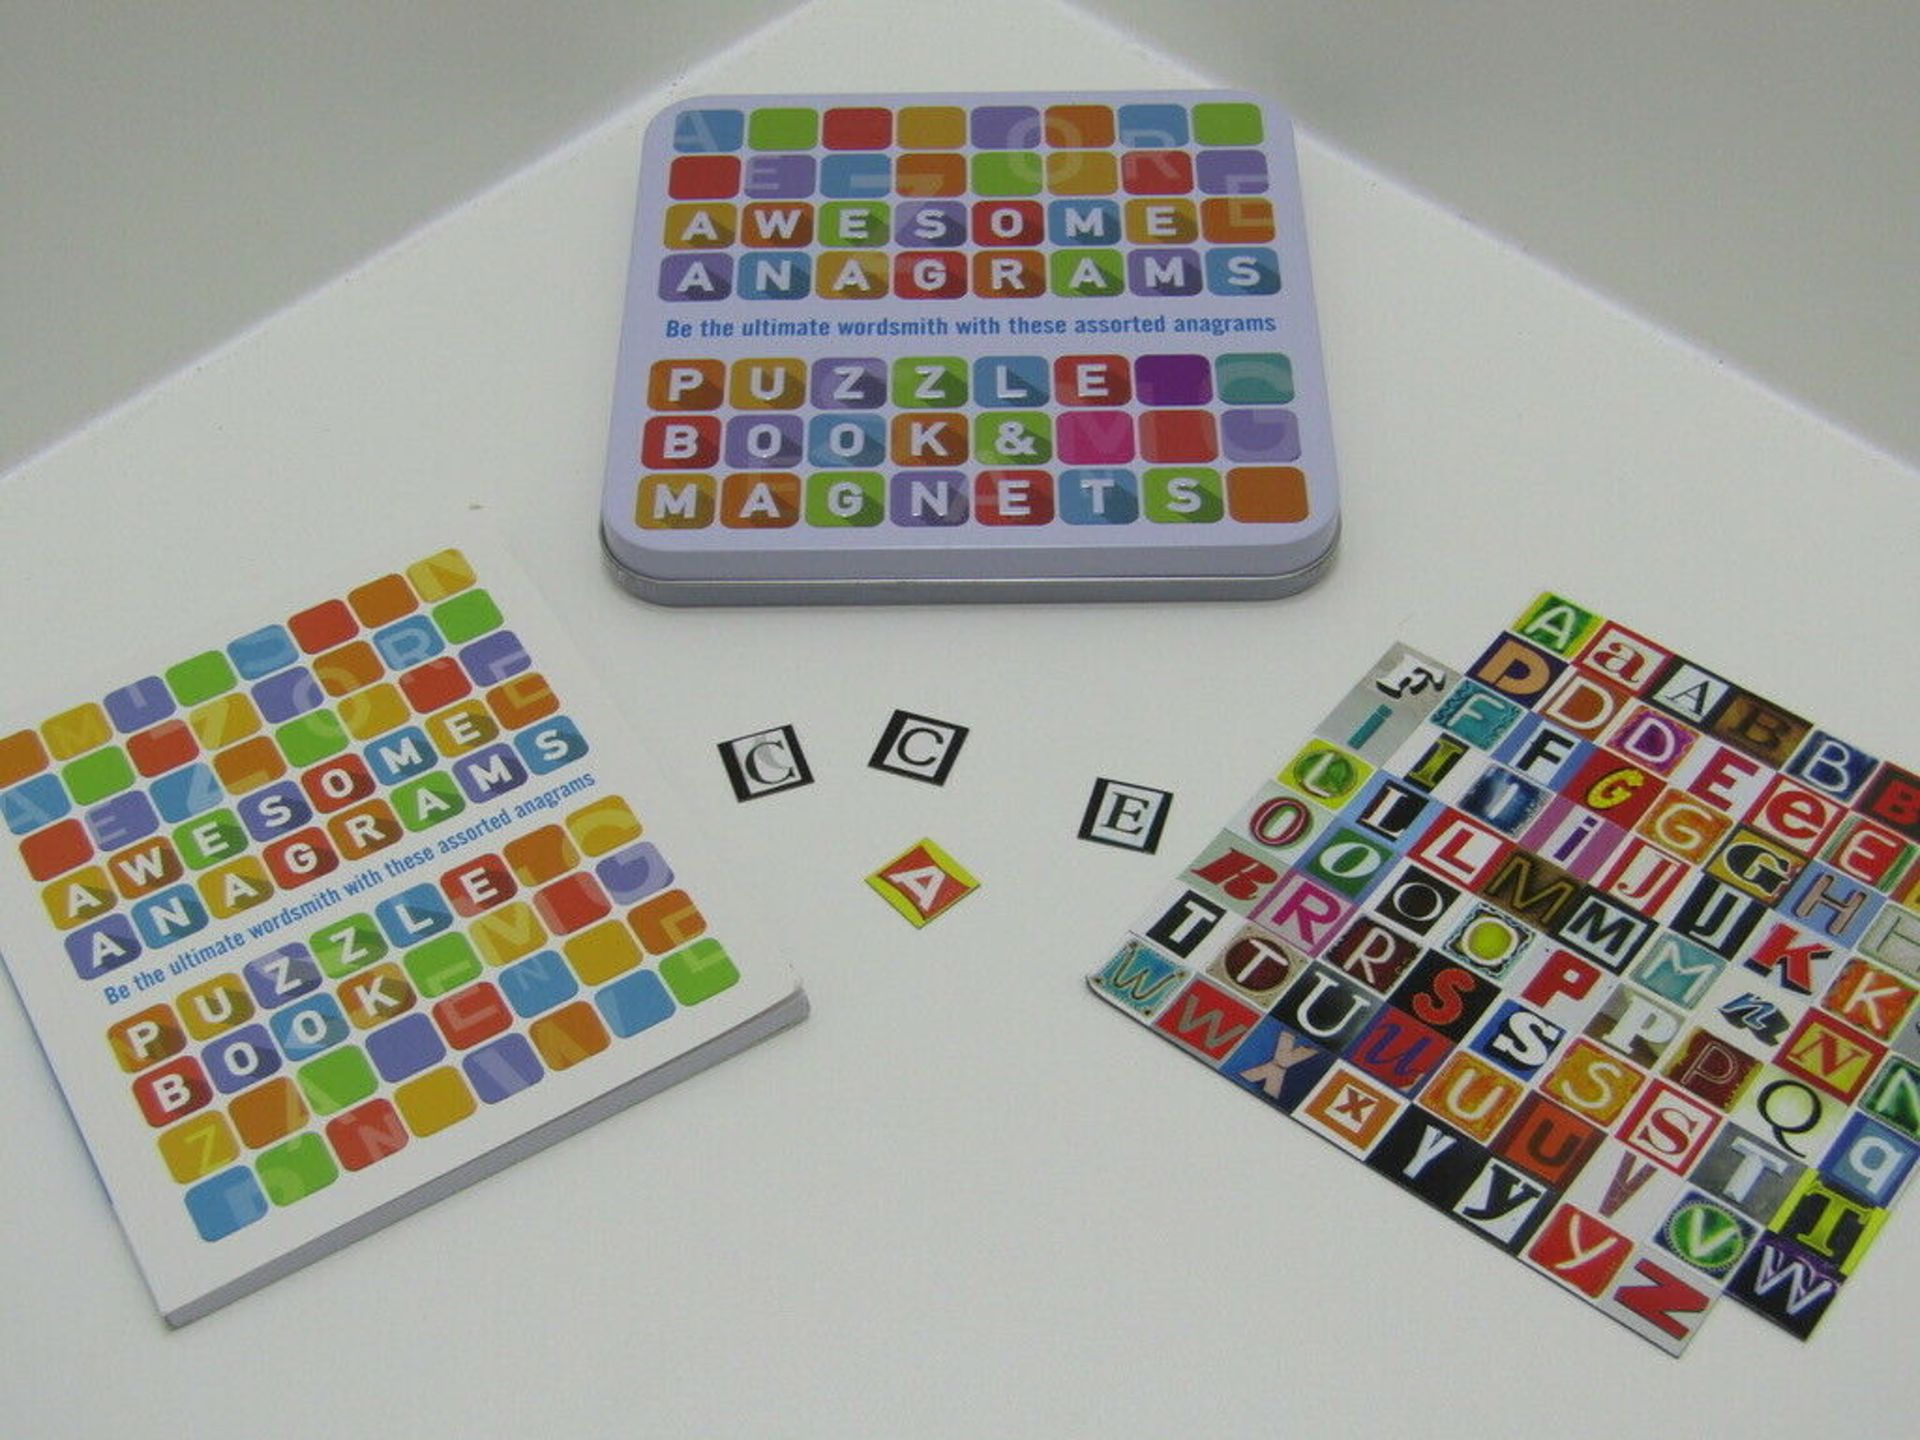 4 x Awesome Anagrams Puzzle Book & Magnet Set. Game.